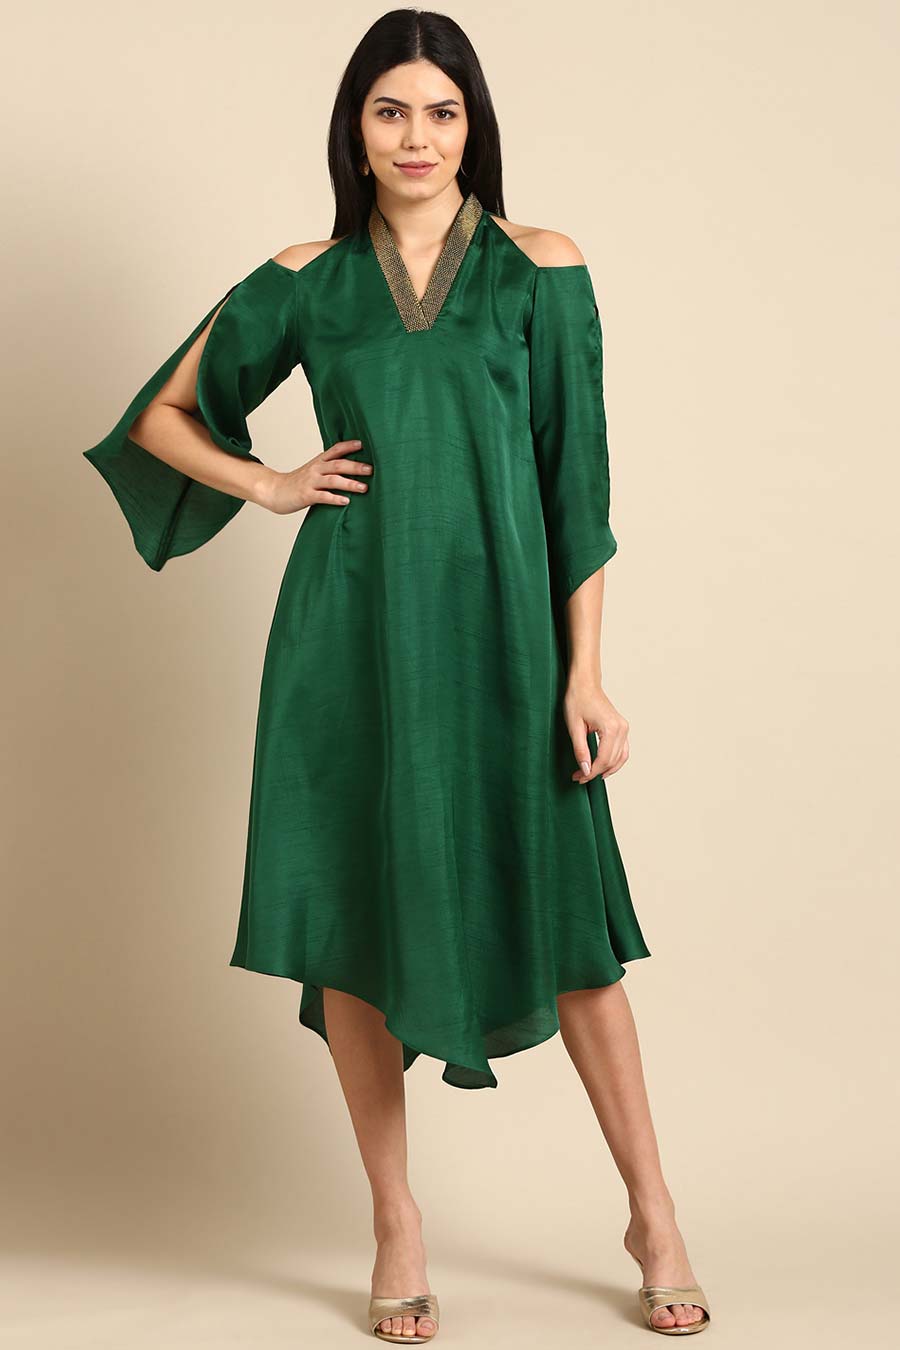 Bottle Green Embroidered Dress